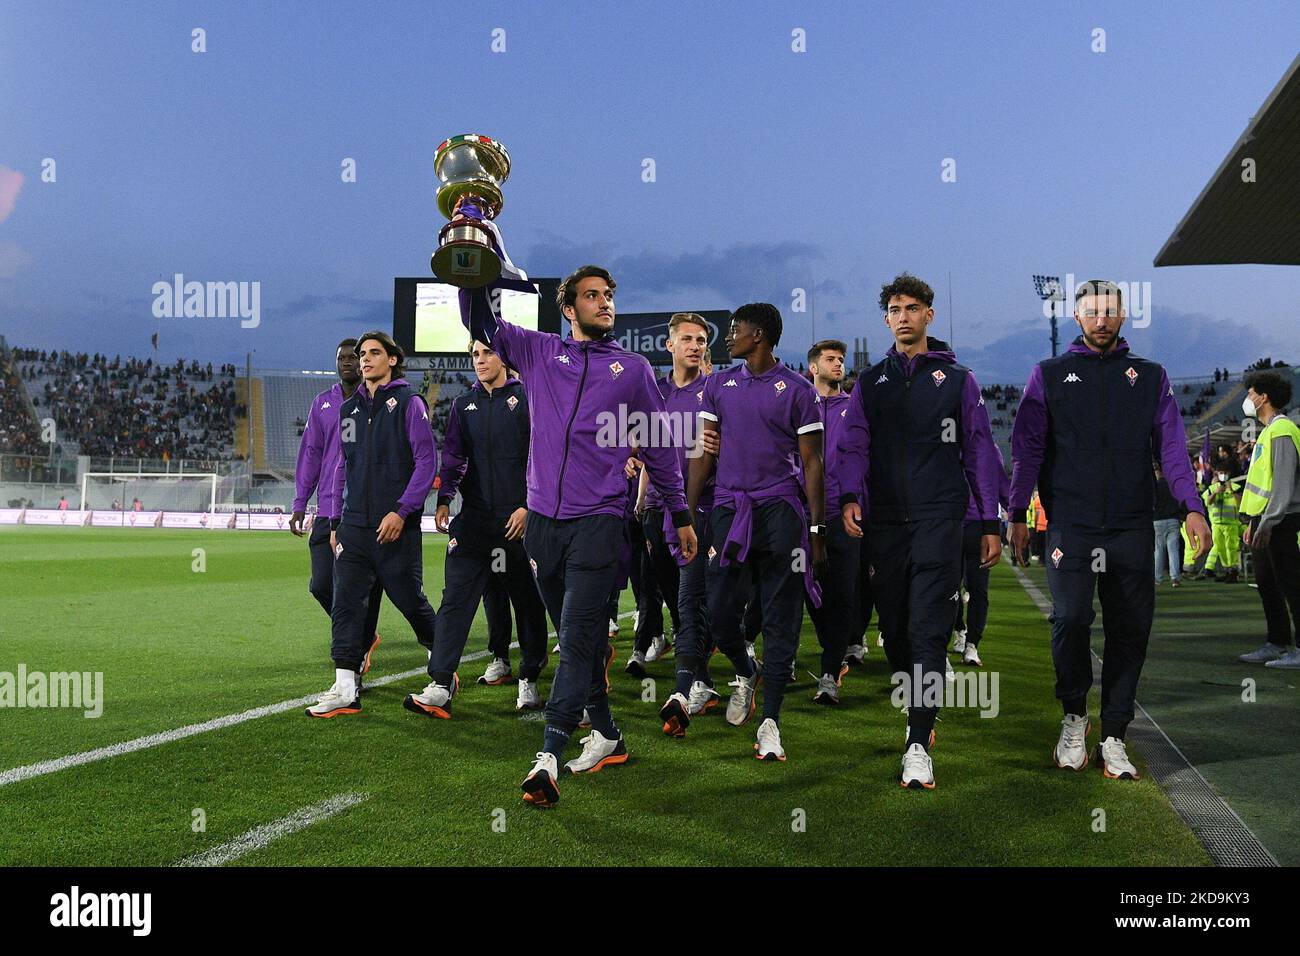 Players of ACF Fiorentina U19 pose with the italian cup trophy during the  Serie A match between ACF Fiorentina and AS Roma on May 9, 2022 in  Florence, Italy. (Photo by Giuseppe